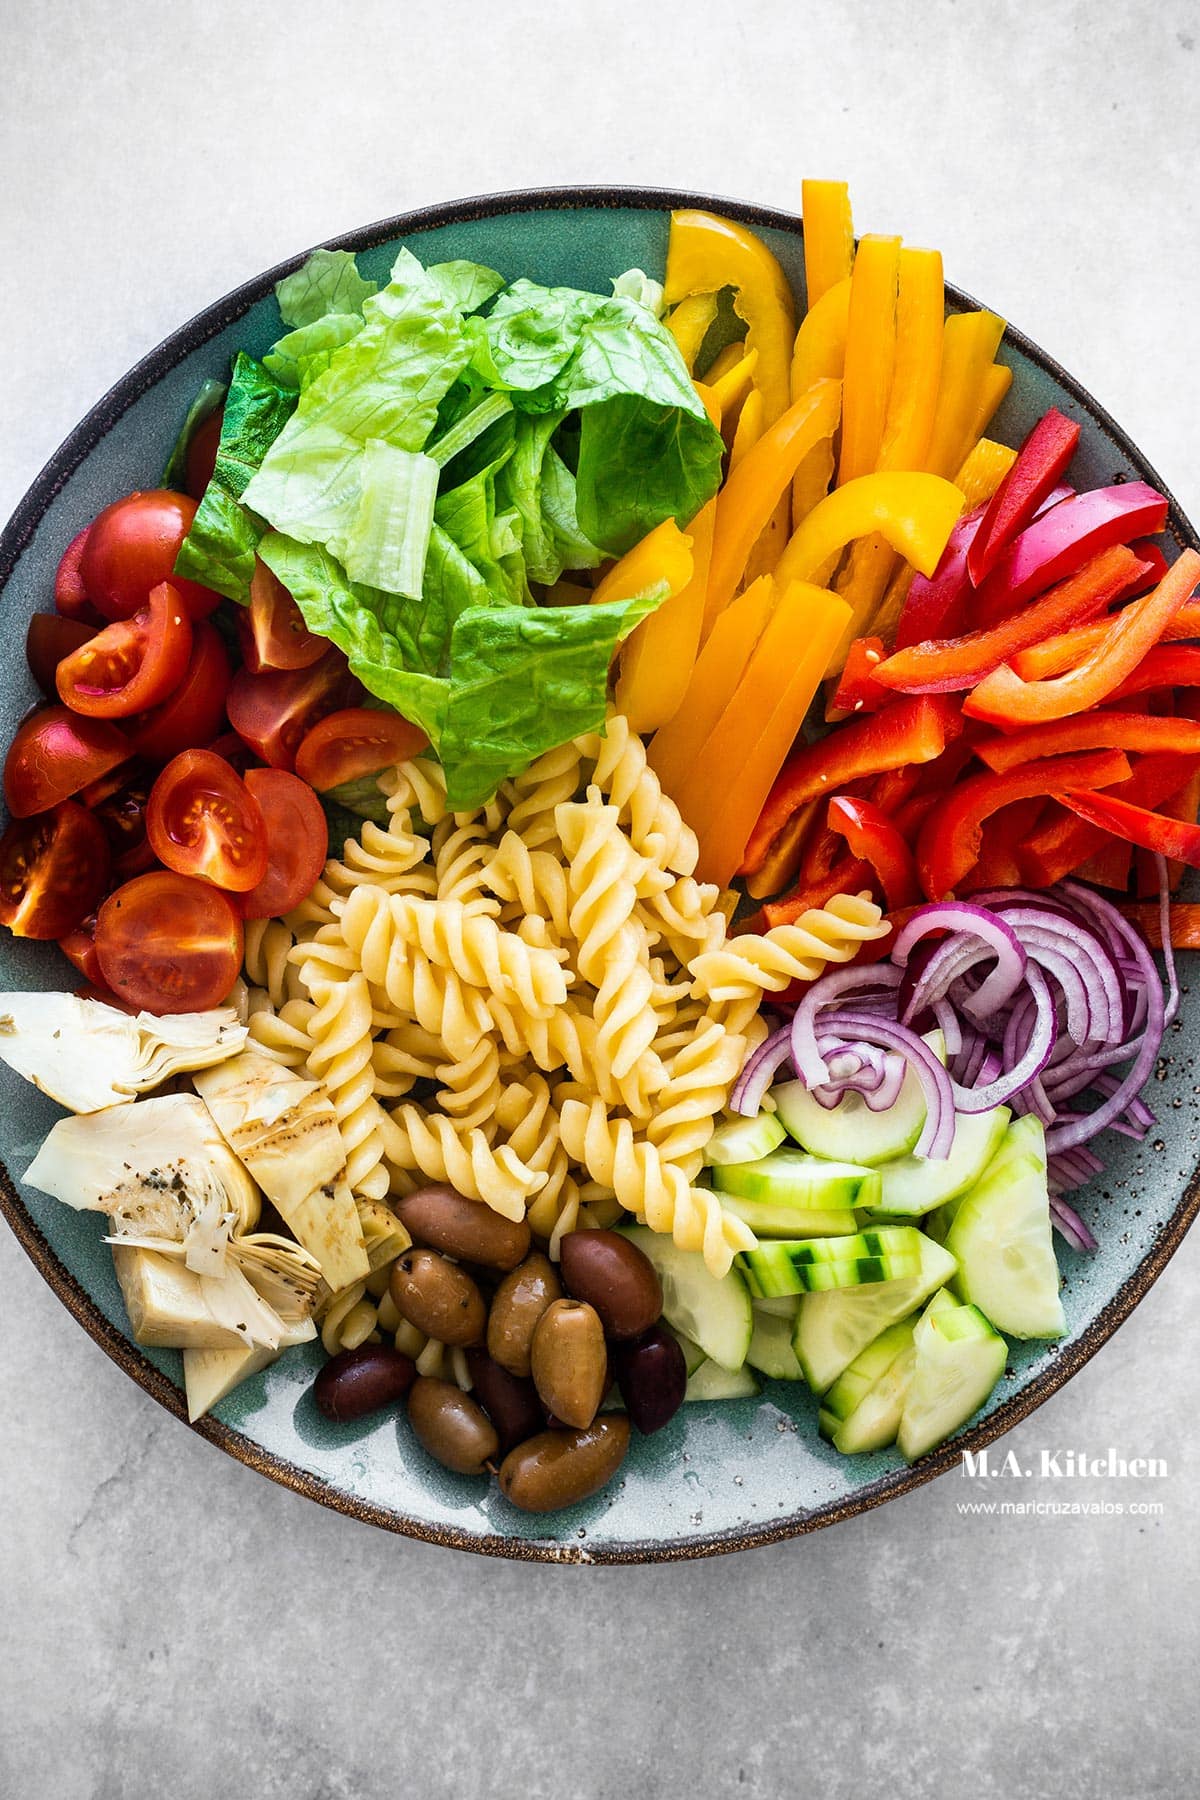 A plate with ingredients for zesty Italian pasta salad.